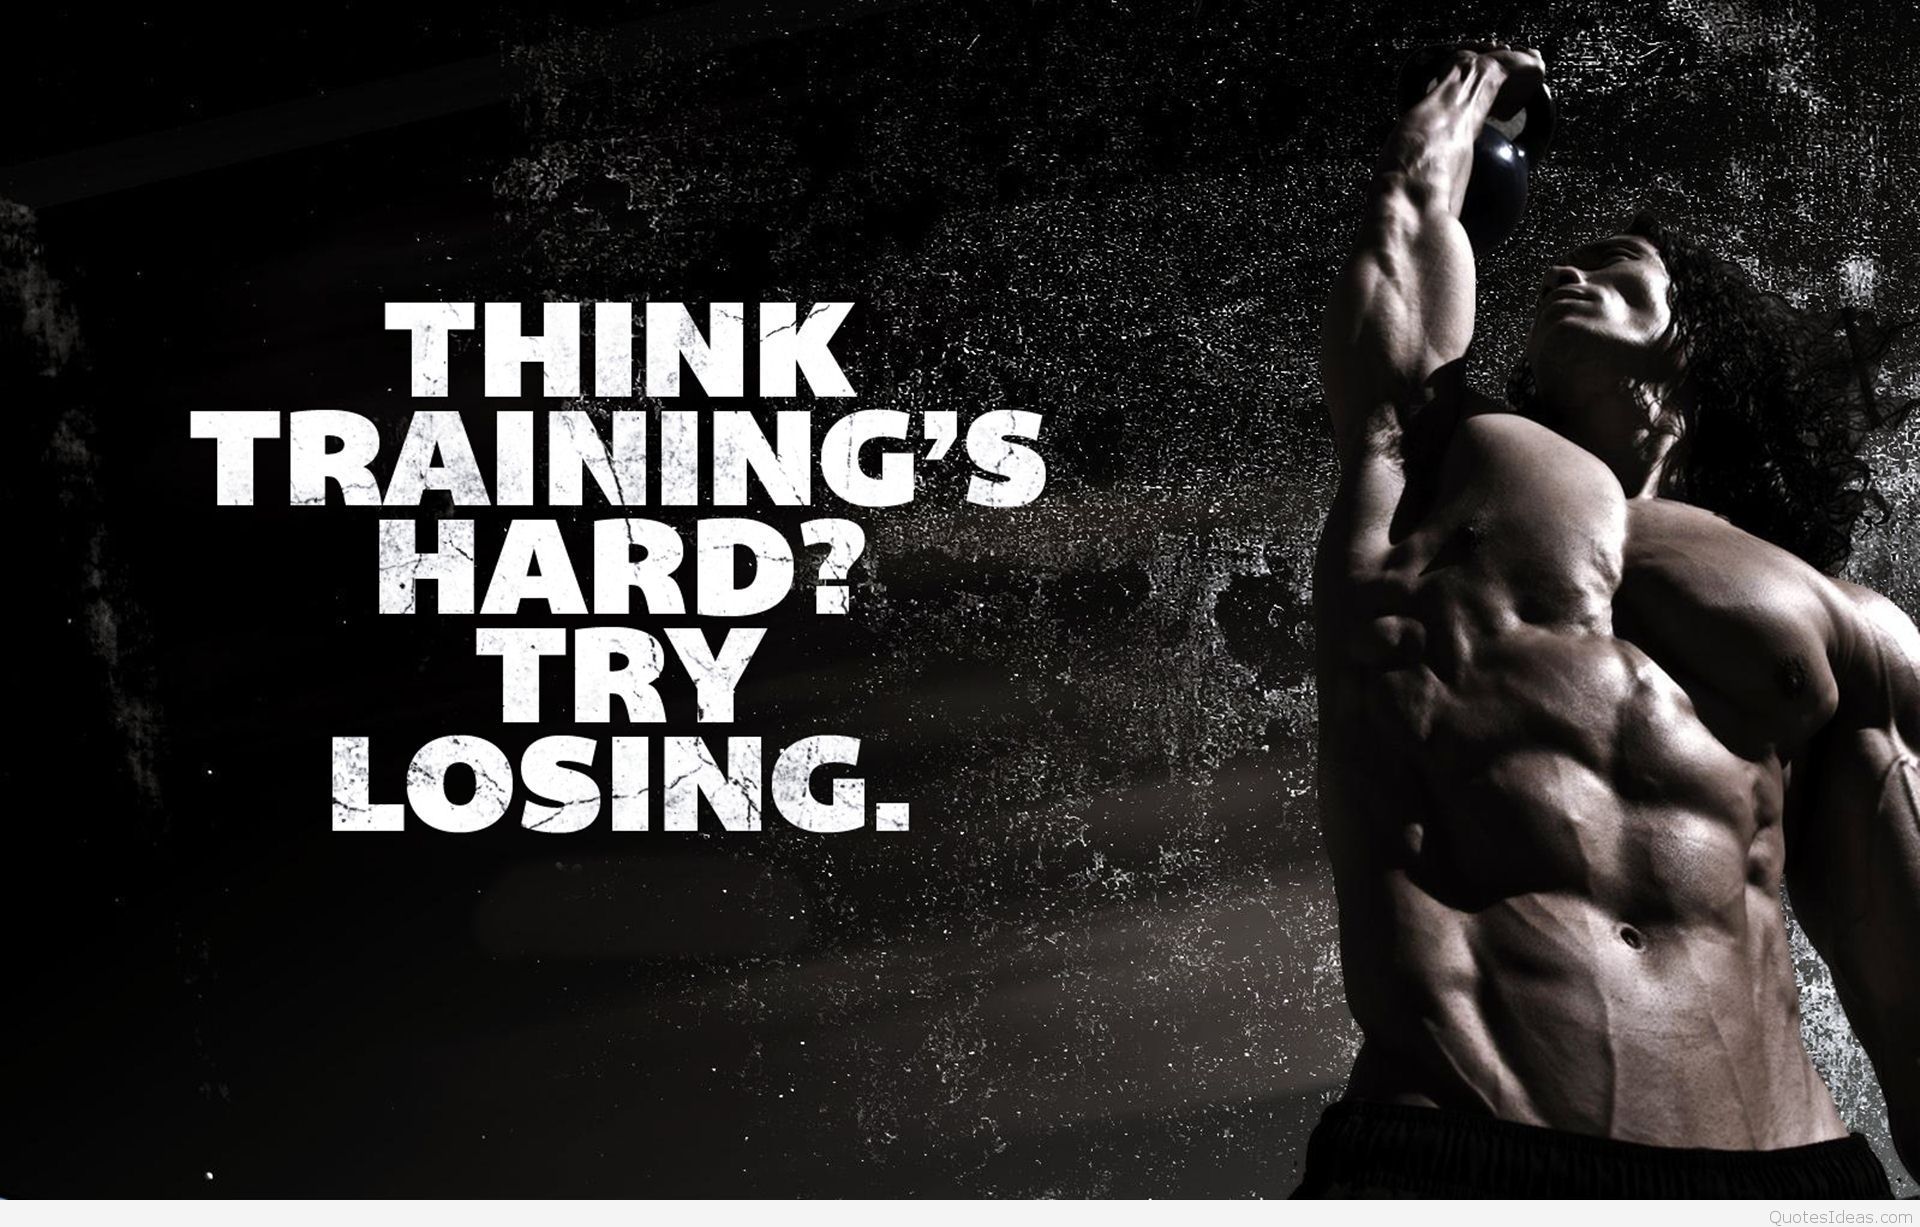 Cute and nice bodybuilding quote wallpaper hd1